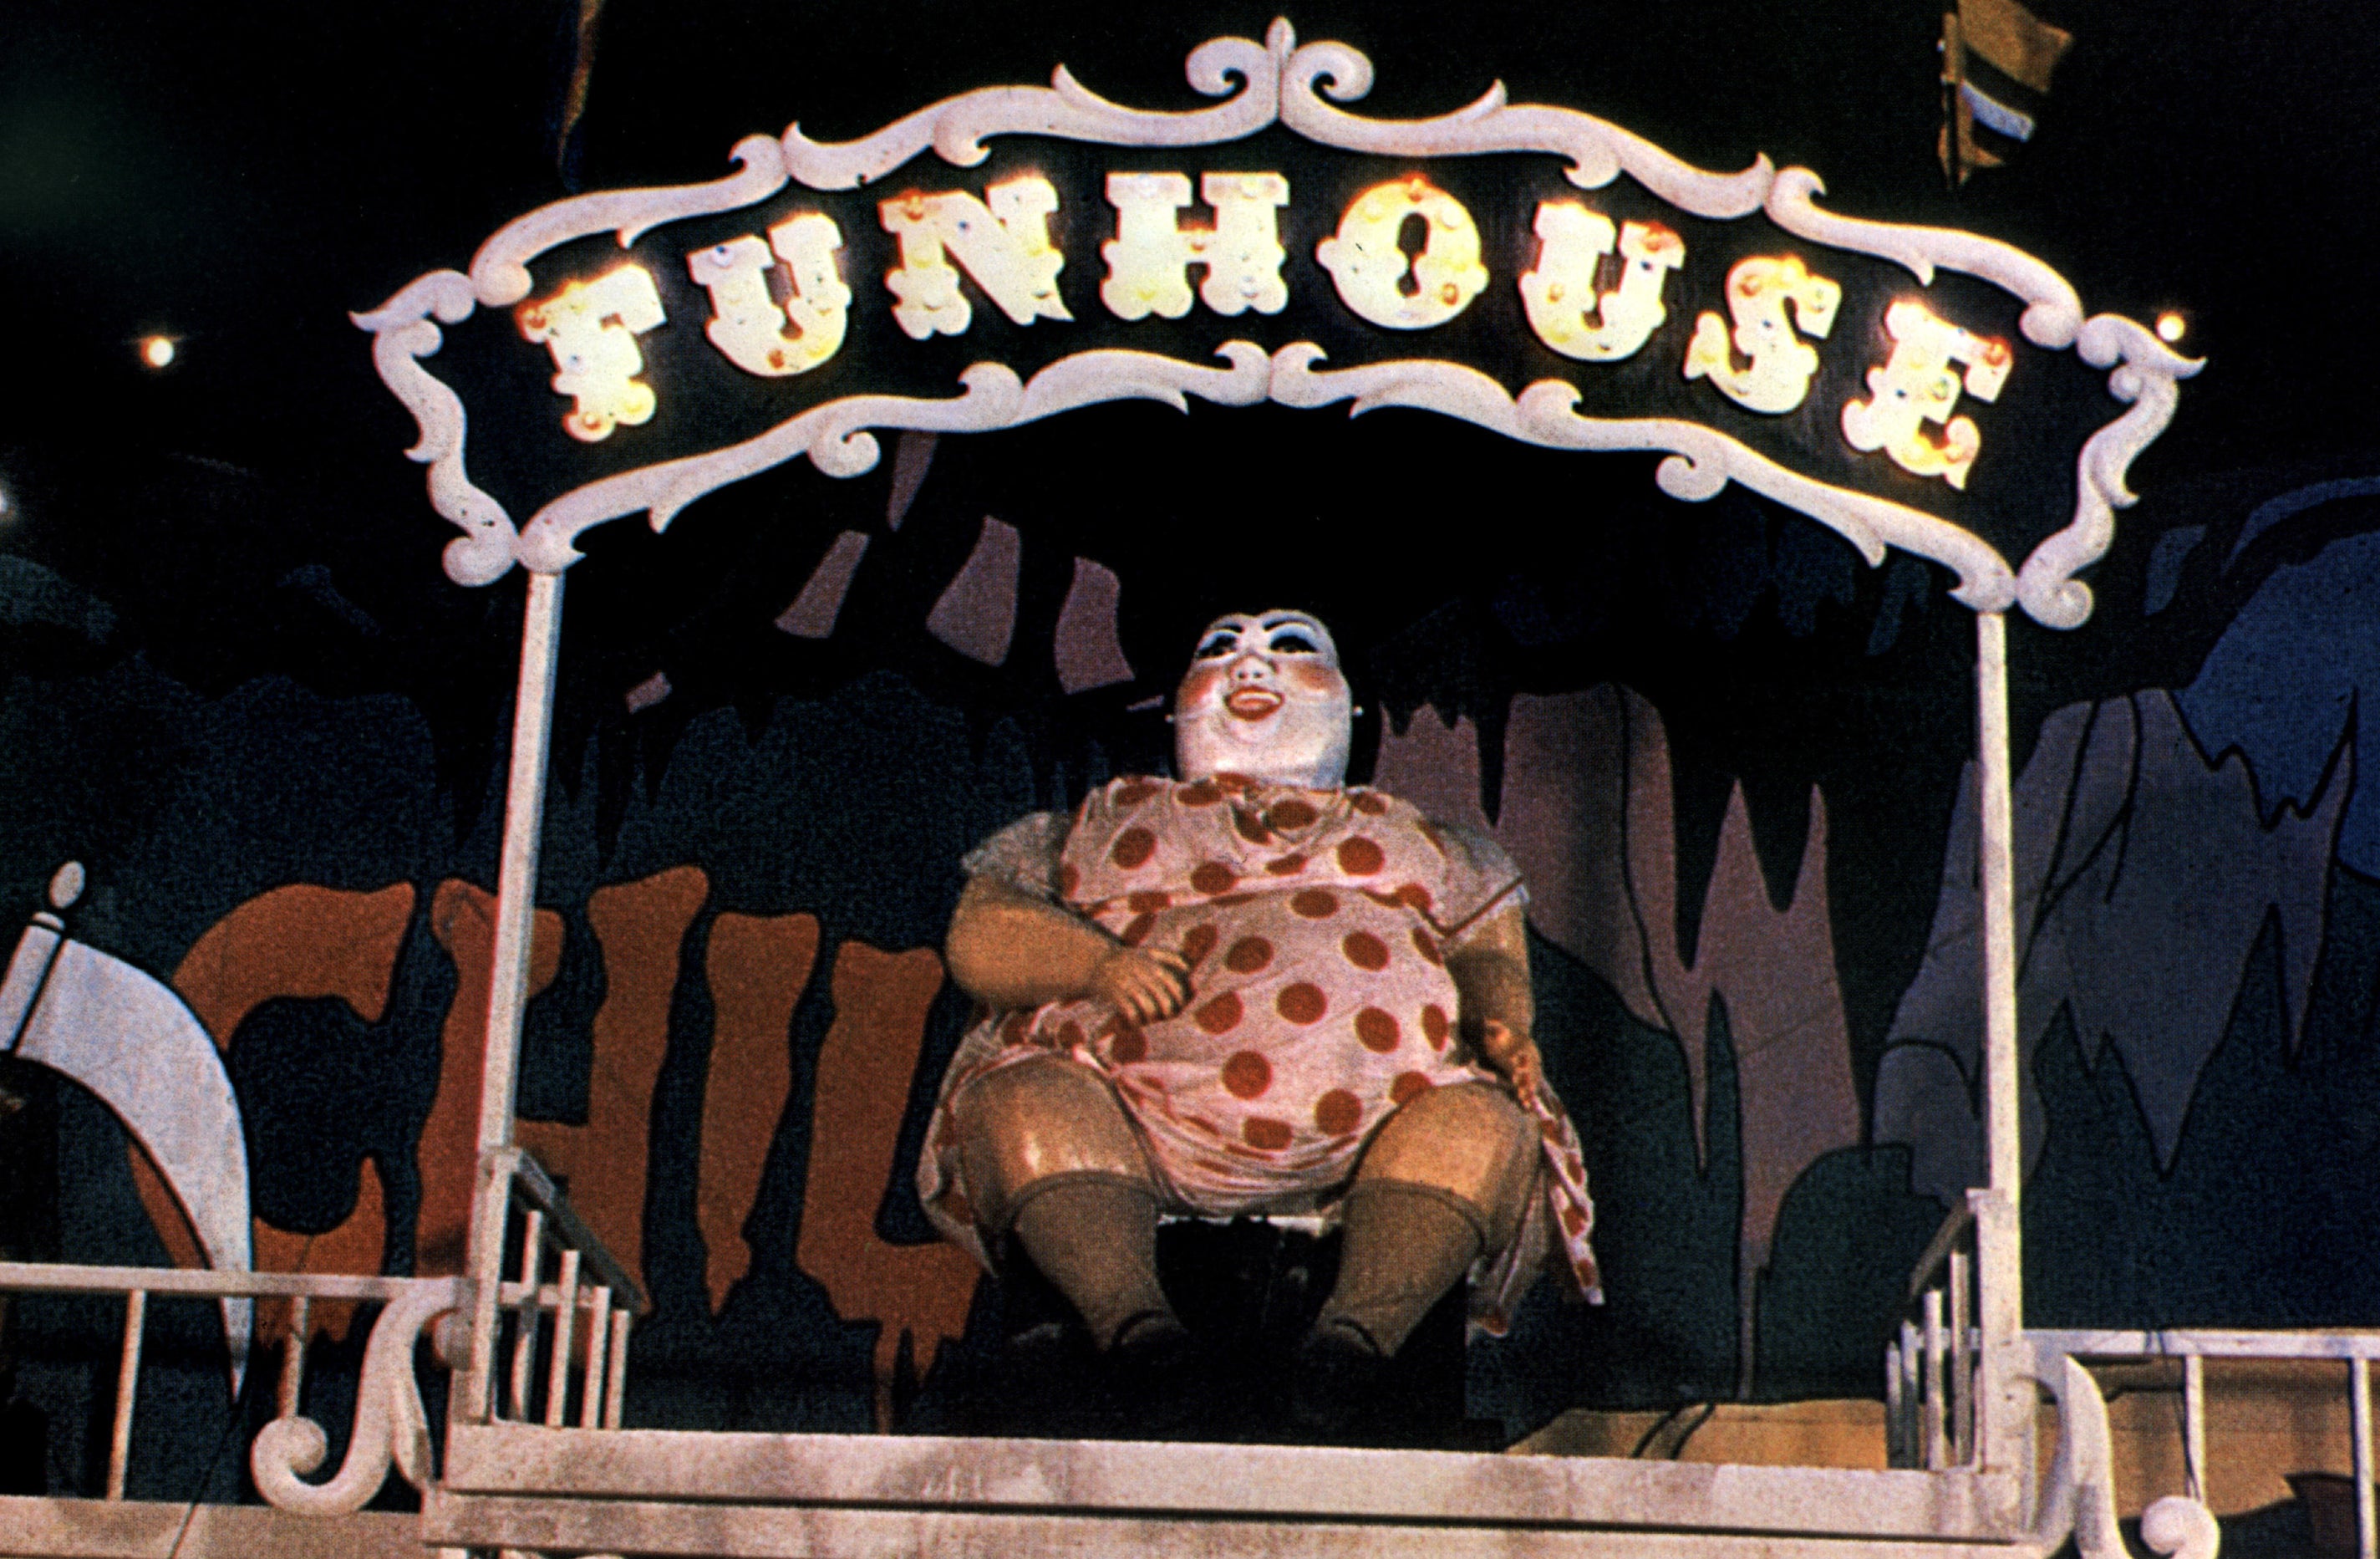 A disturbing clown-like statue adorns the entrance to &quot;The Funhouse&quot;